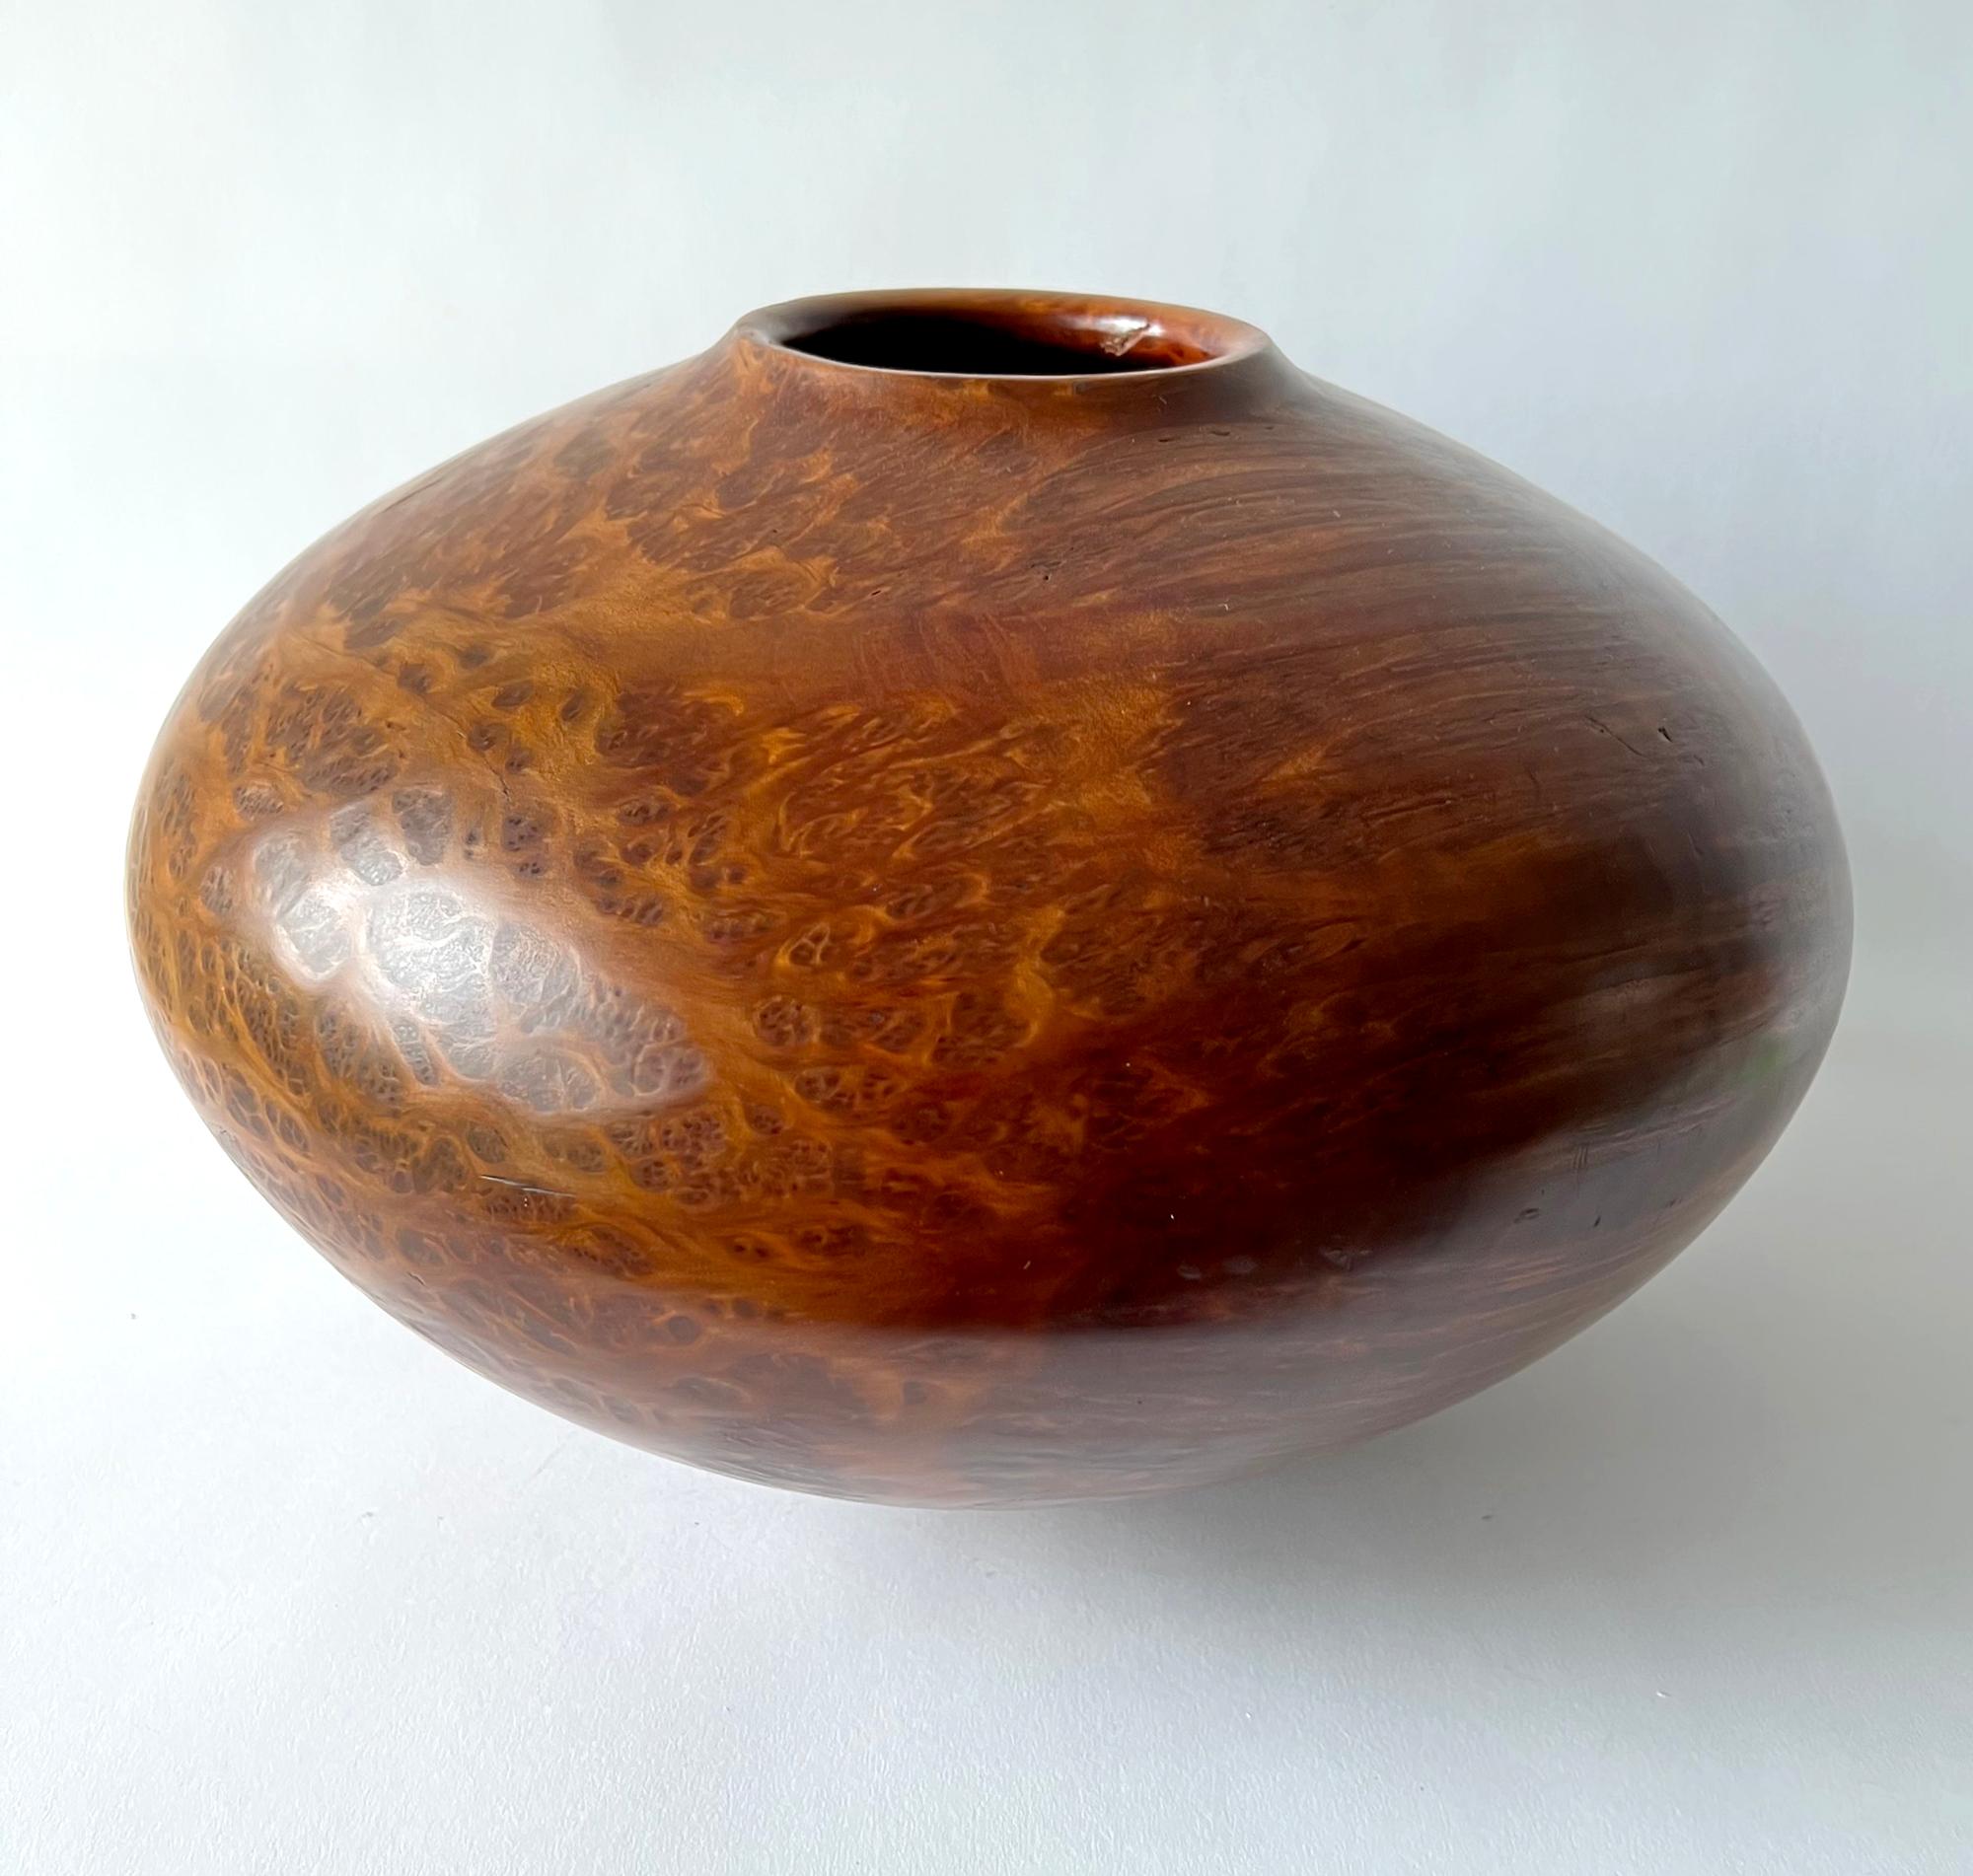 Large scale Redwood lace burl wood hand turned vase created by wood sculptor Dennis Elliott of Florida, circa 1987. Bowl measures 10